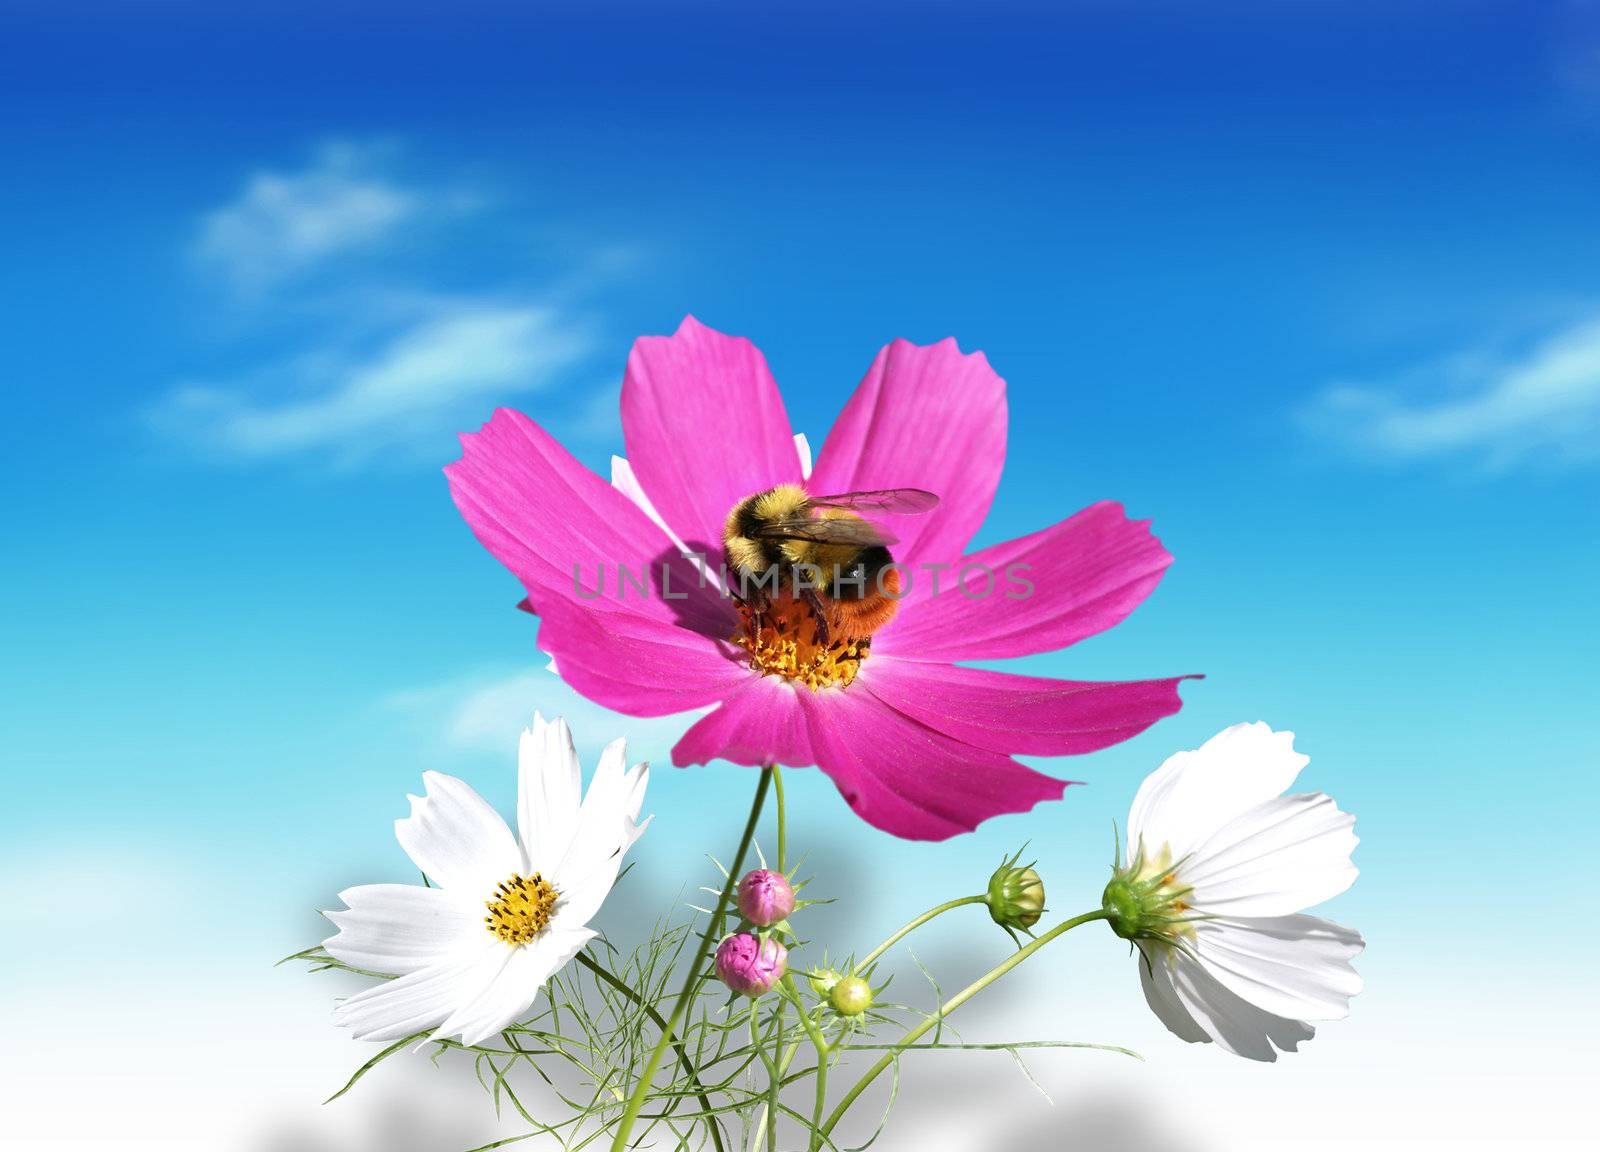 Flowers and a bee by git